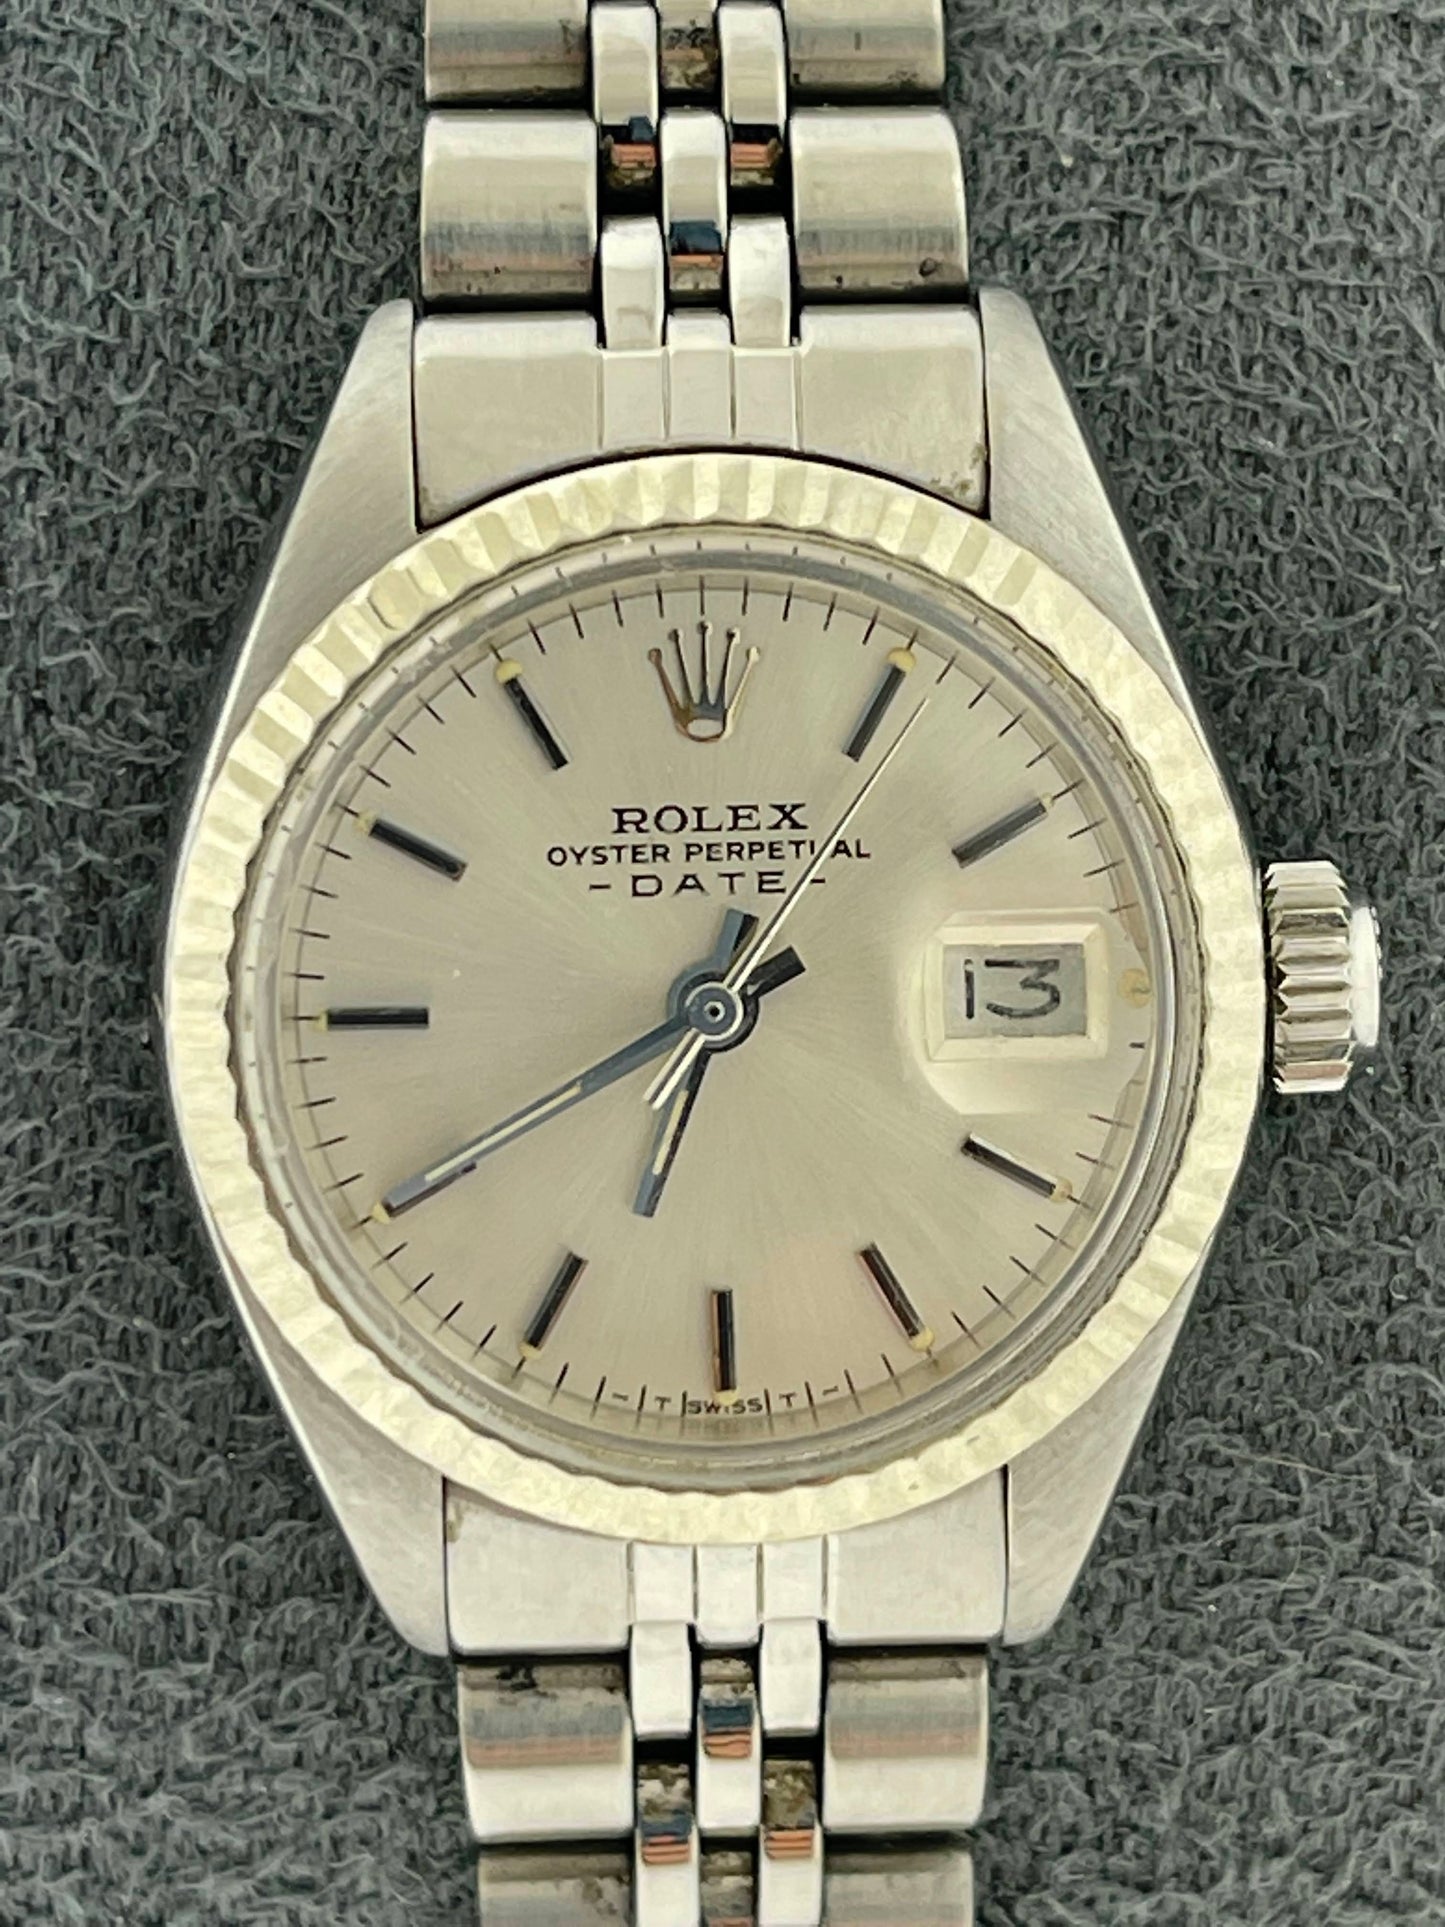 1978 Rolex Ladies Date 6917 Silver Dial Jubilee No Papers 26mm